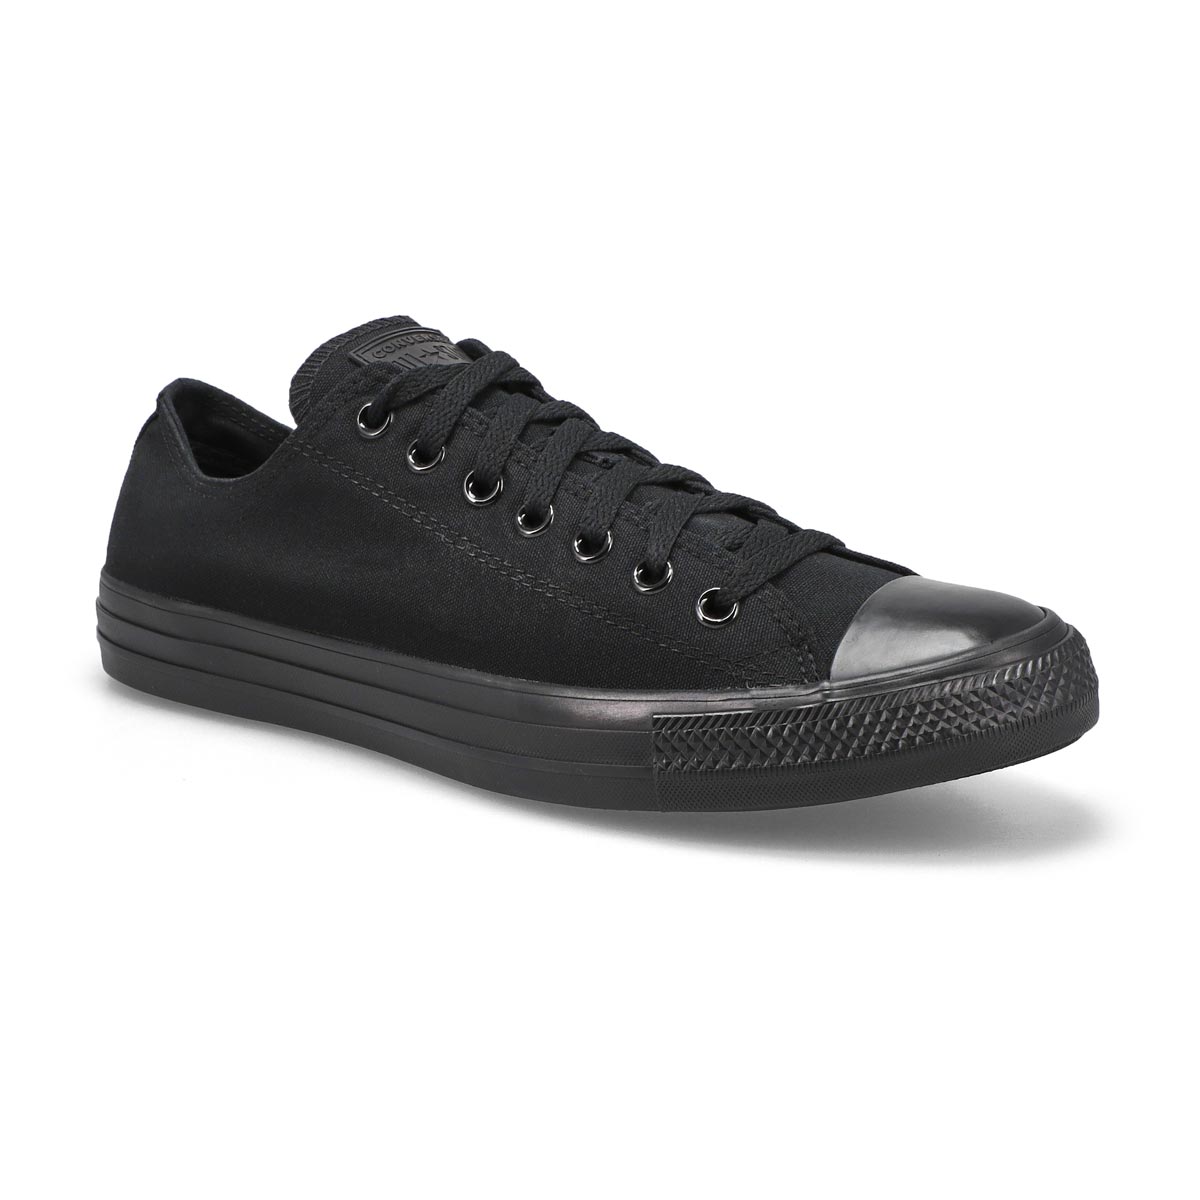 all star converse shoes online